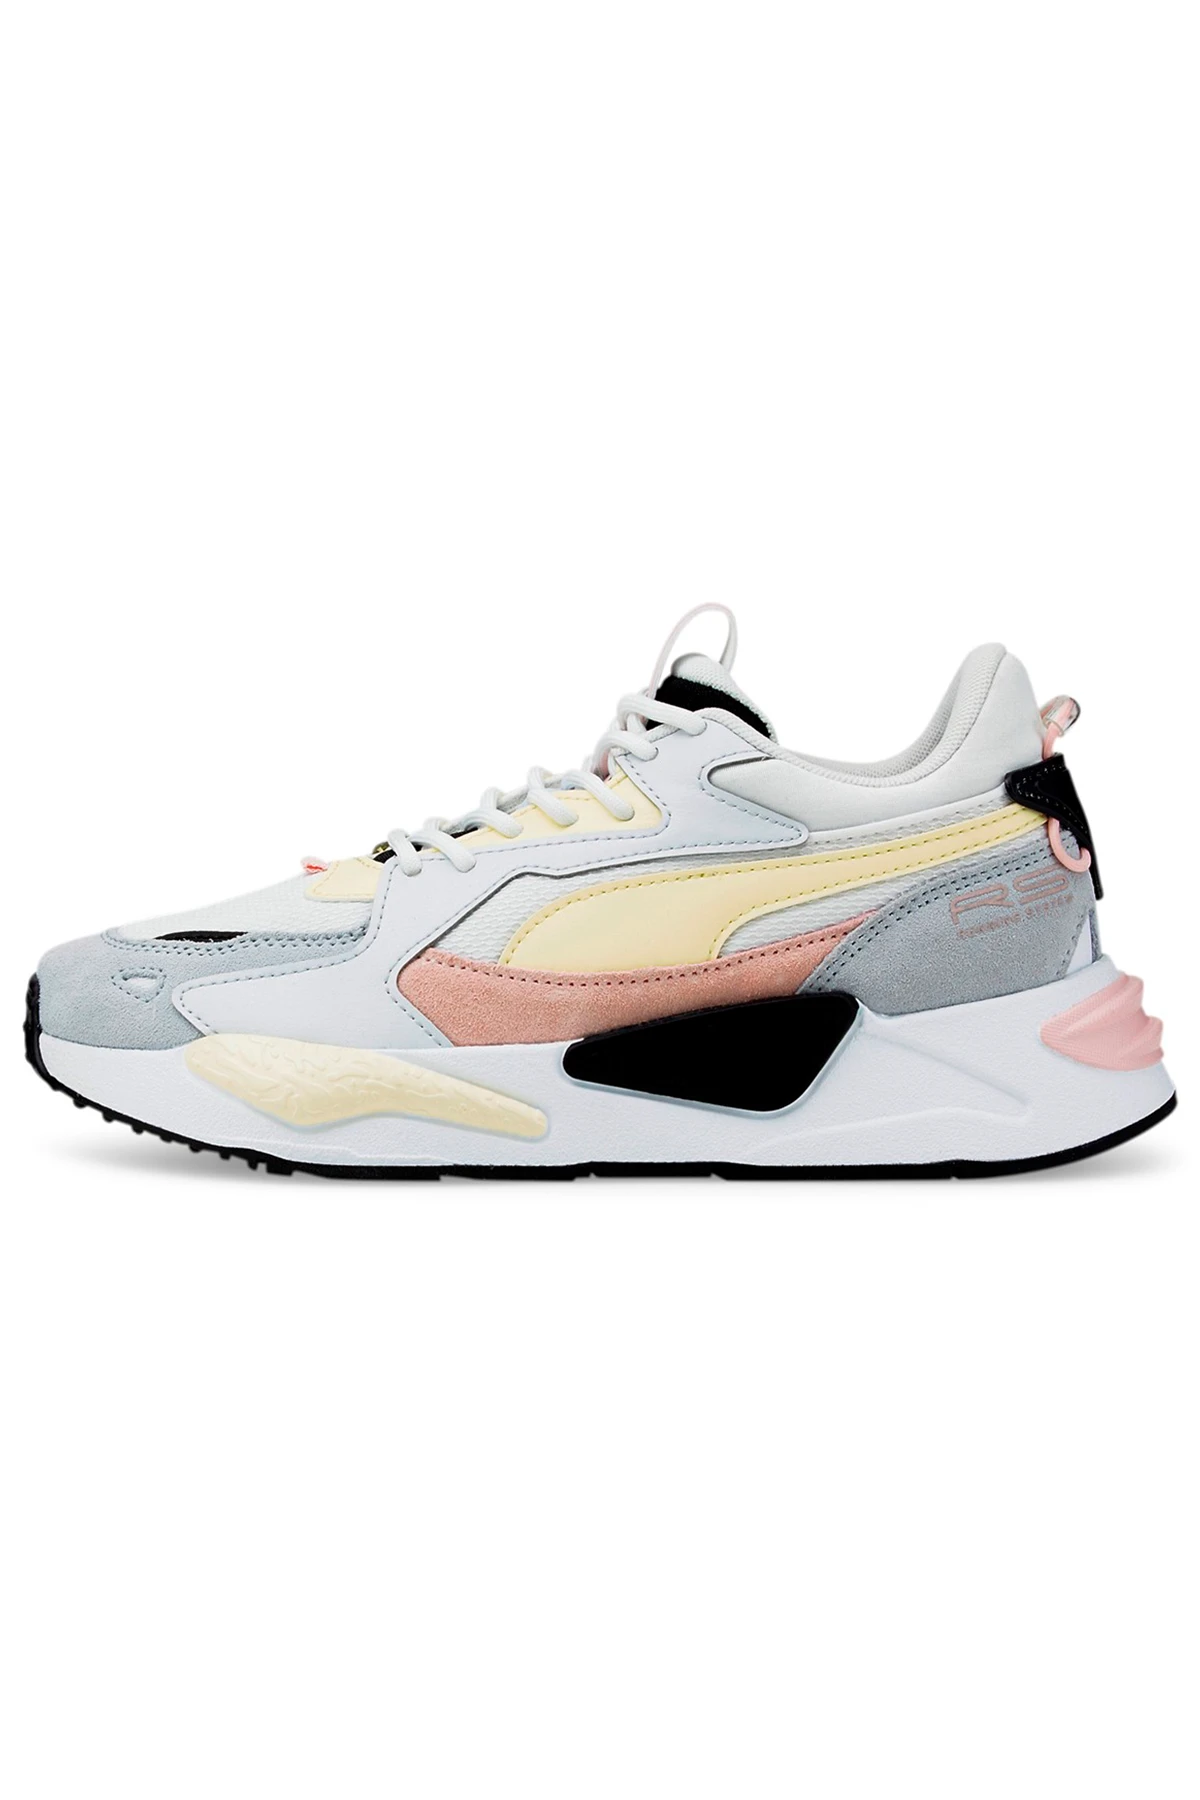 PUMA RS-X Reinvent Wn's | White Women's Sneakers | YOOX